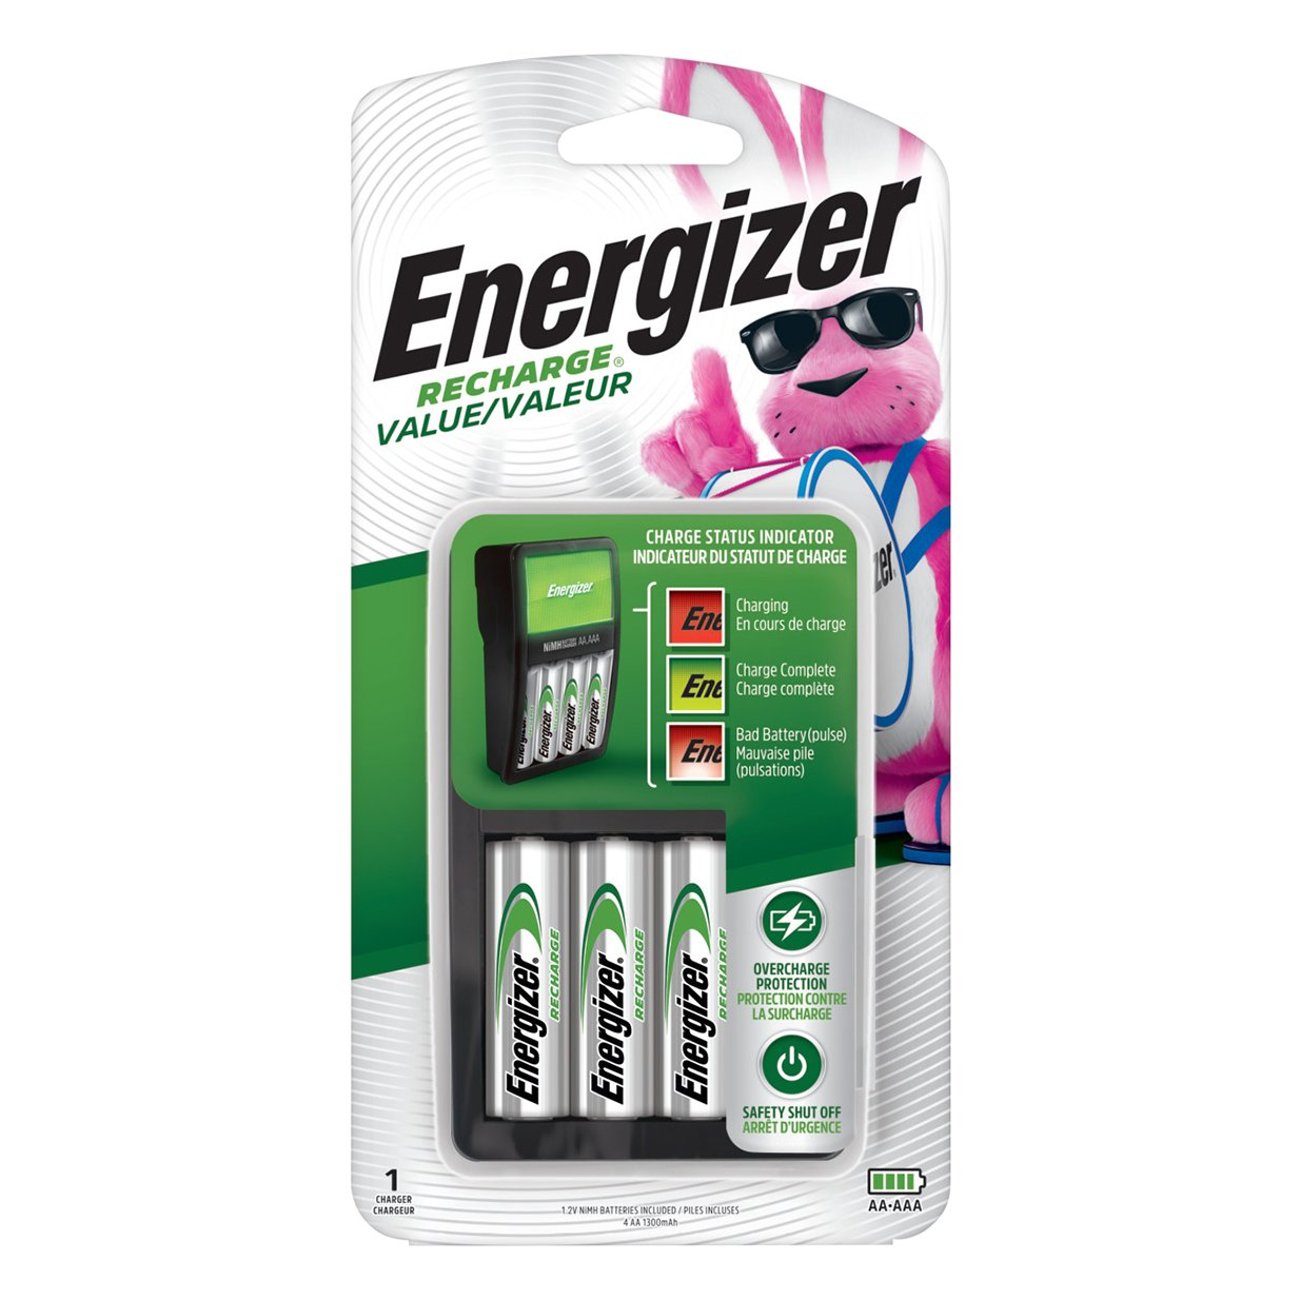 kooi Interactie Denemarken Energizer Recharge Value Charger for NiMH Rechargeable AA/AAA Batteries -  Shop Batteries at H-E-B